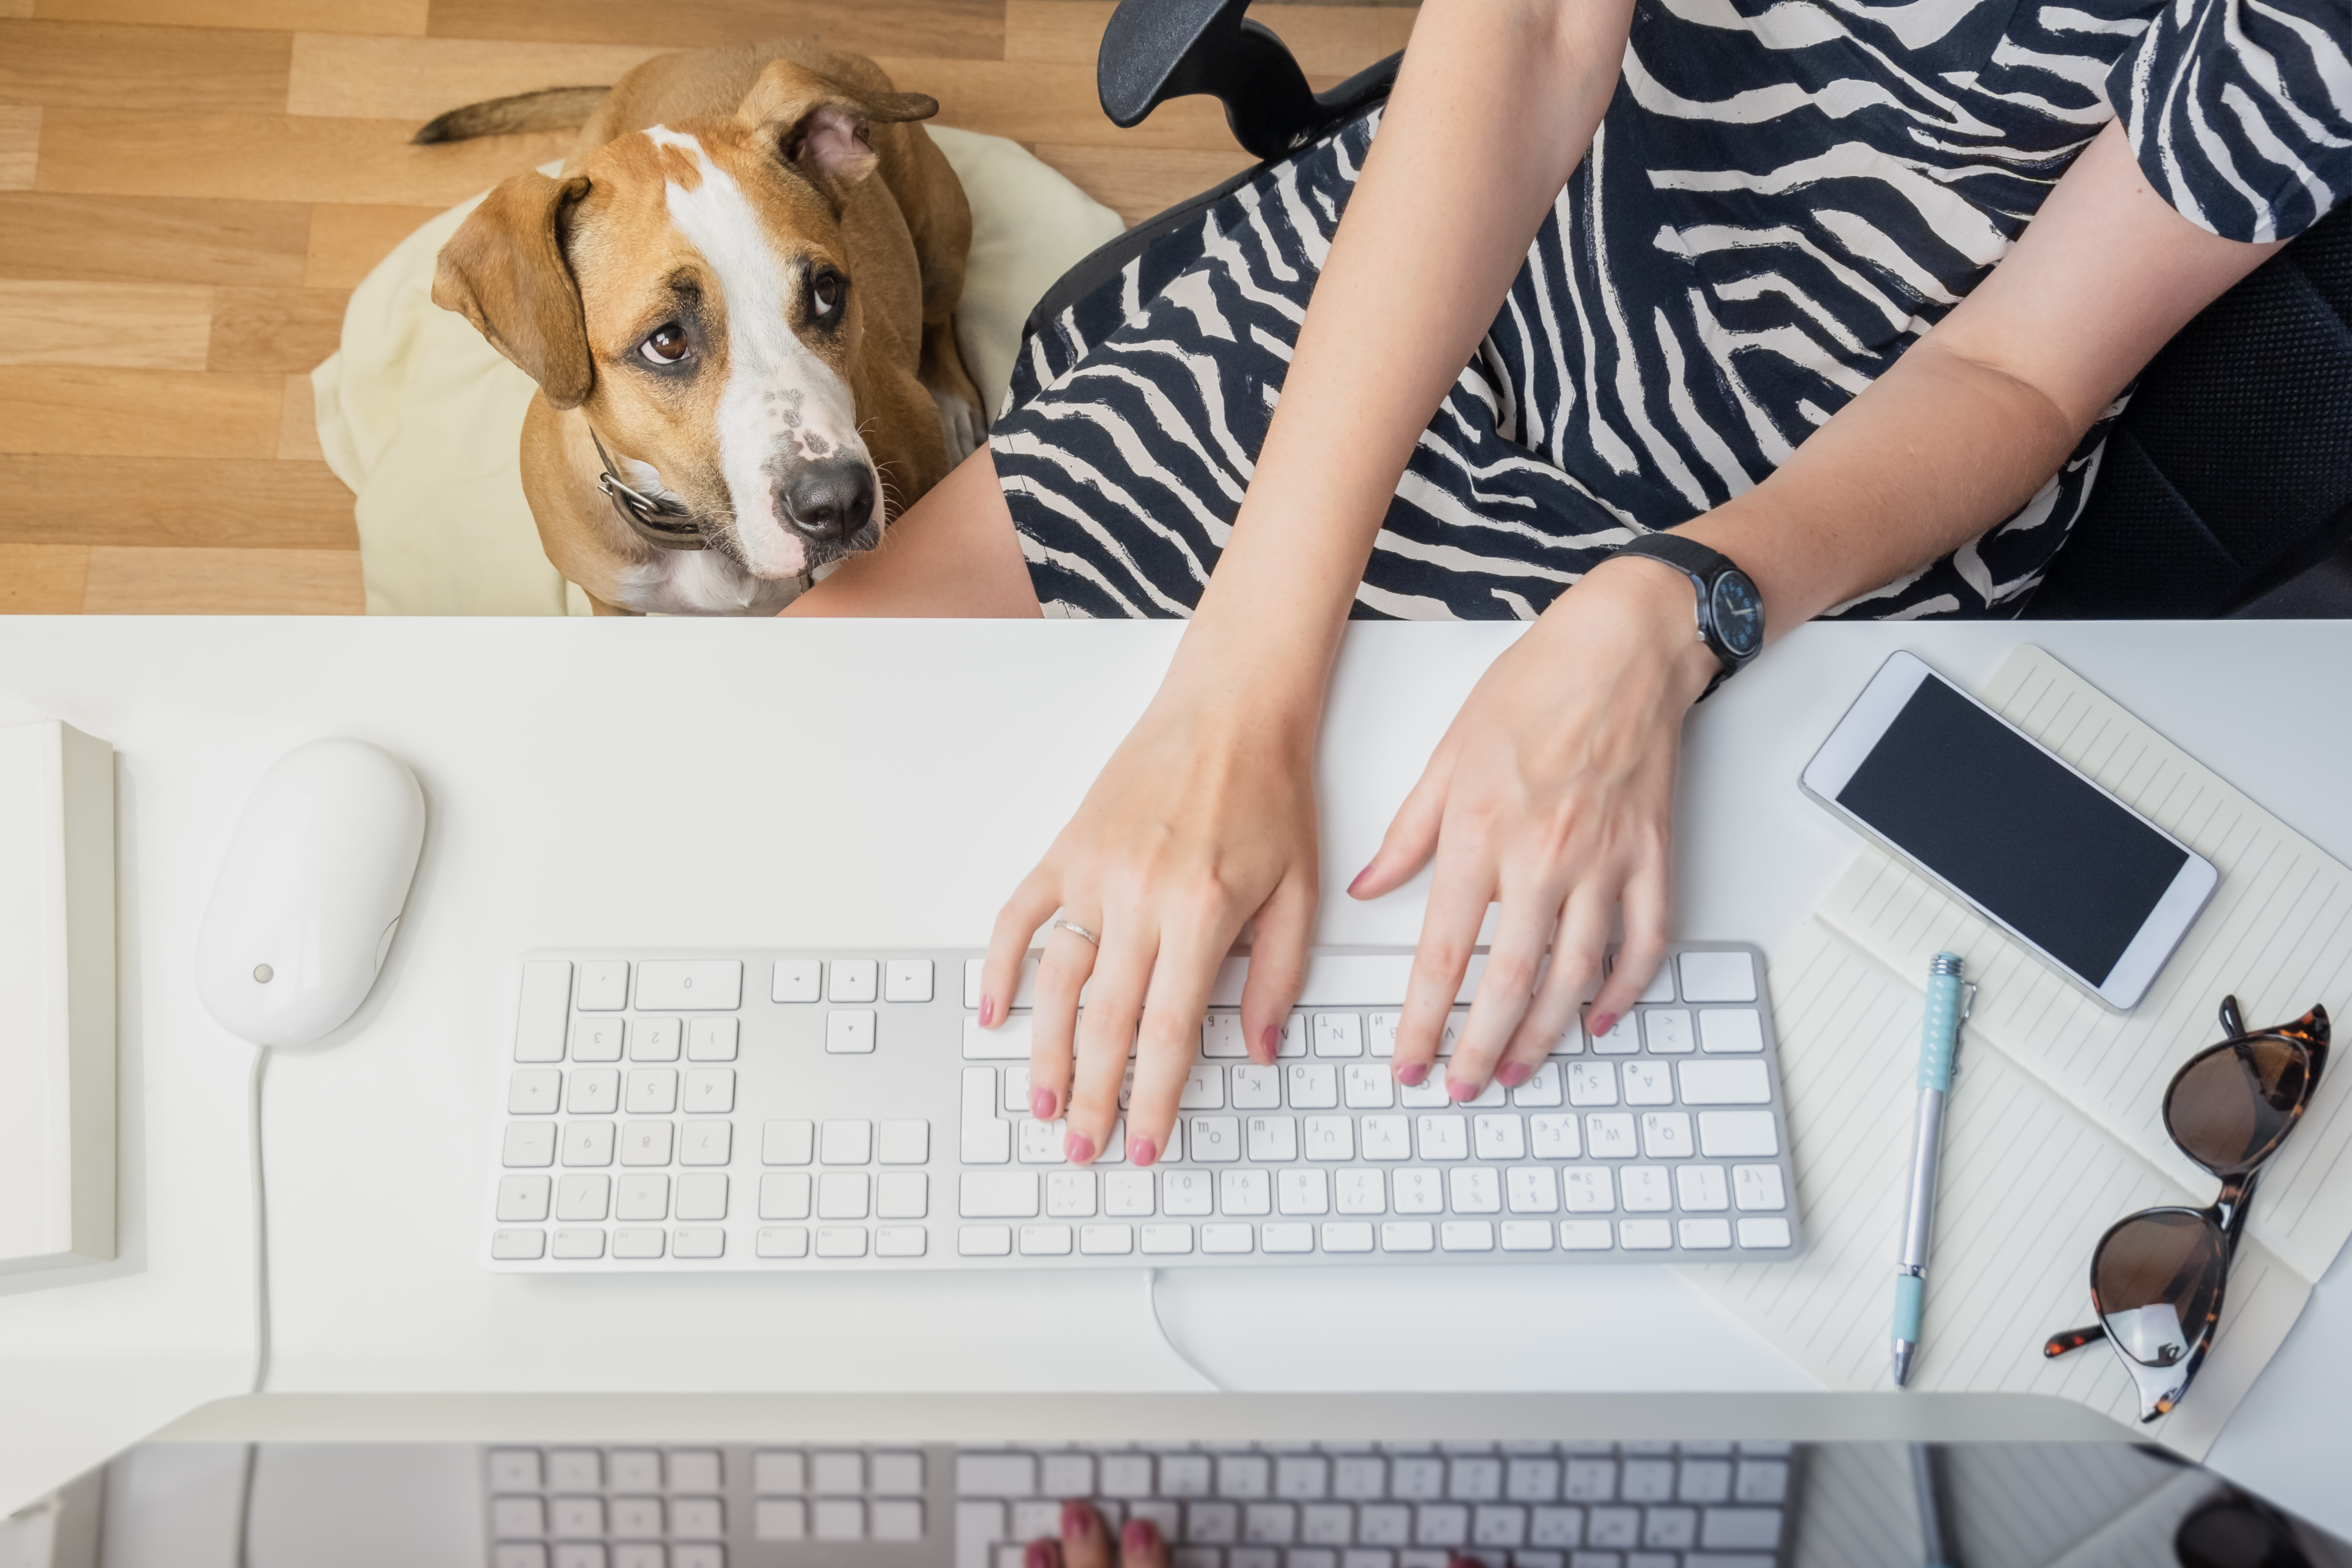 A Life Saving Story, Going to work with pets concept: woman working at desktop computer with dog next to her. Top view of business woman at office desk and a staffordshire terrier puppy in her feet